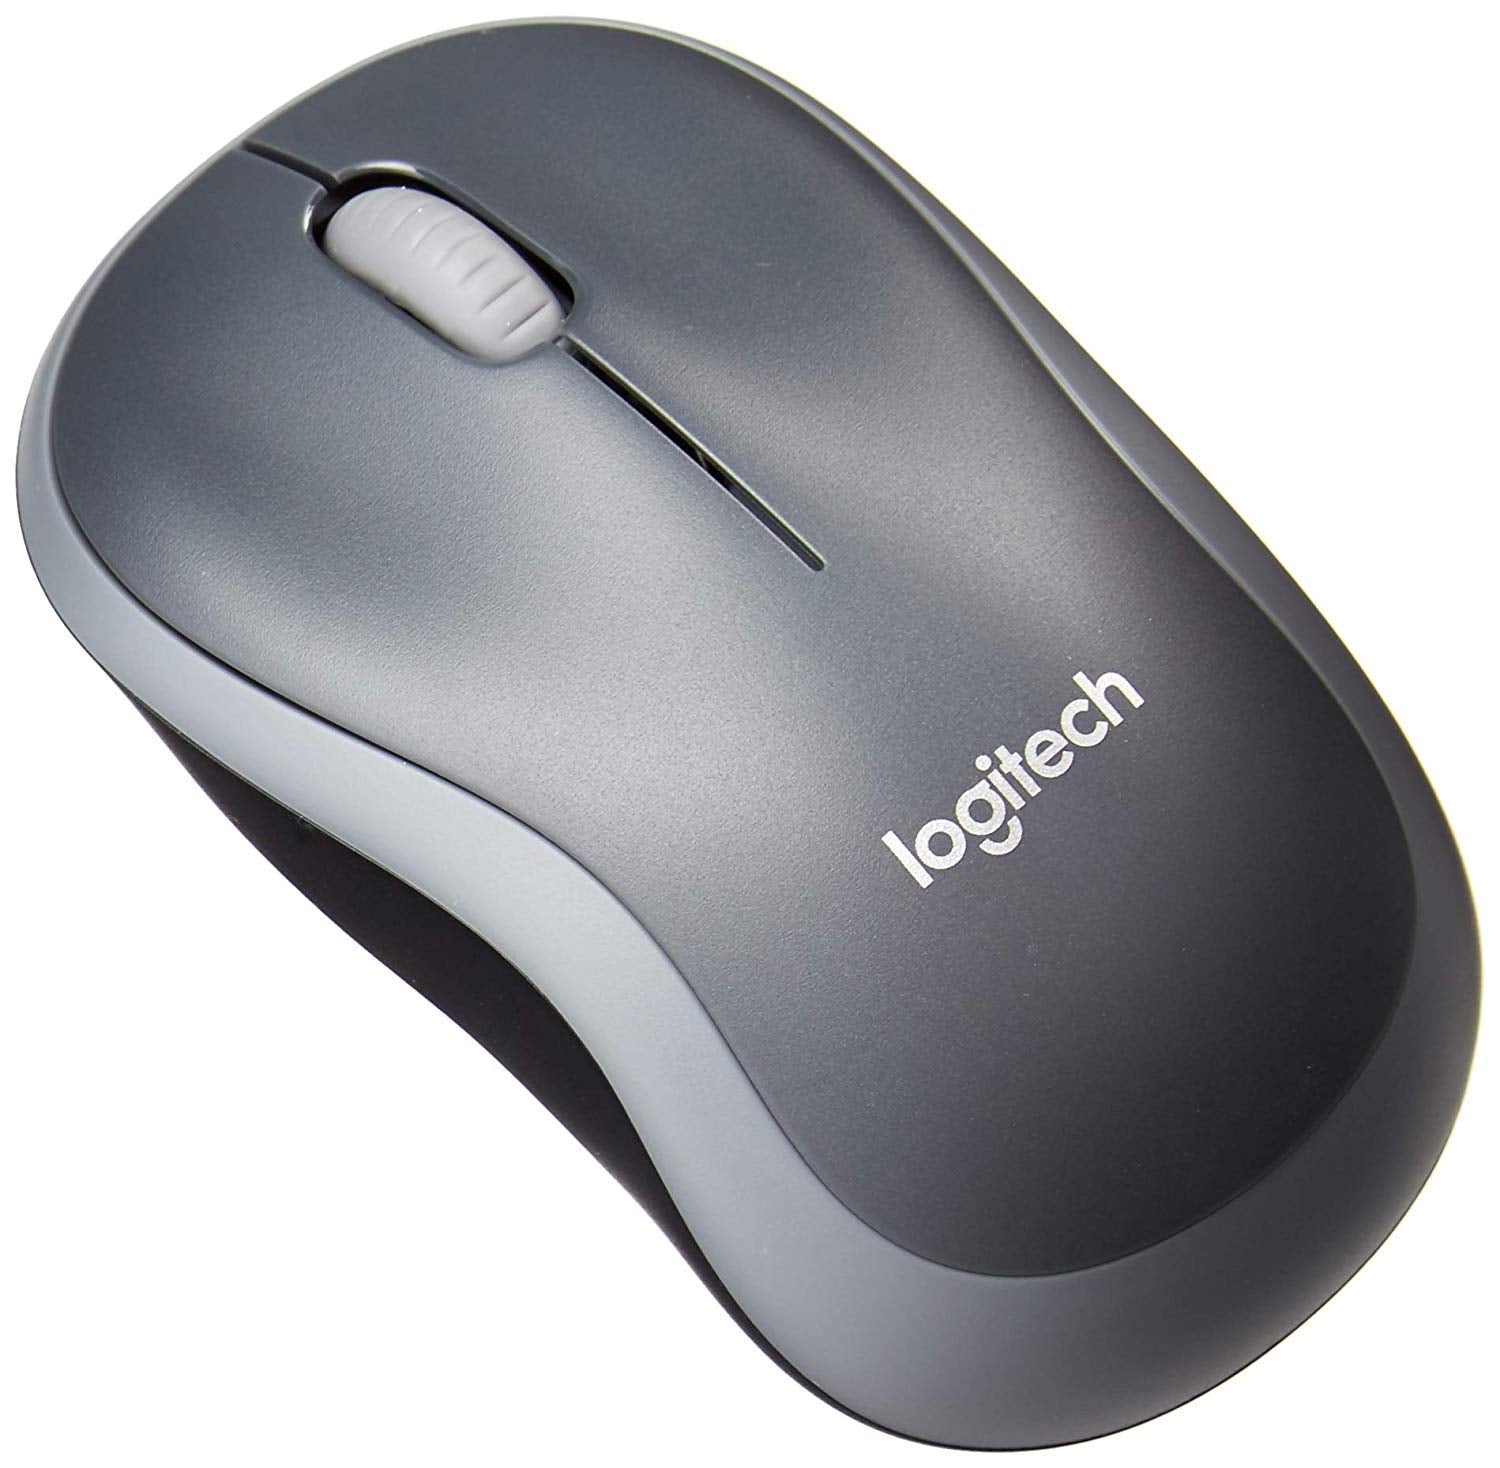 Logitech M185 Wireless Mouse for Computers Laptops Fast Scrolling Bundle (4-Pack + Stylus)